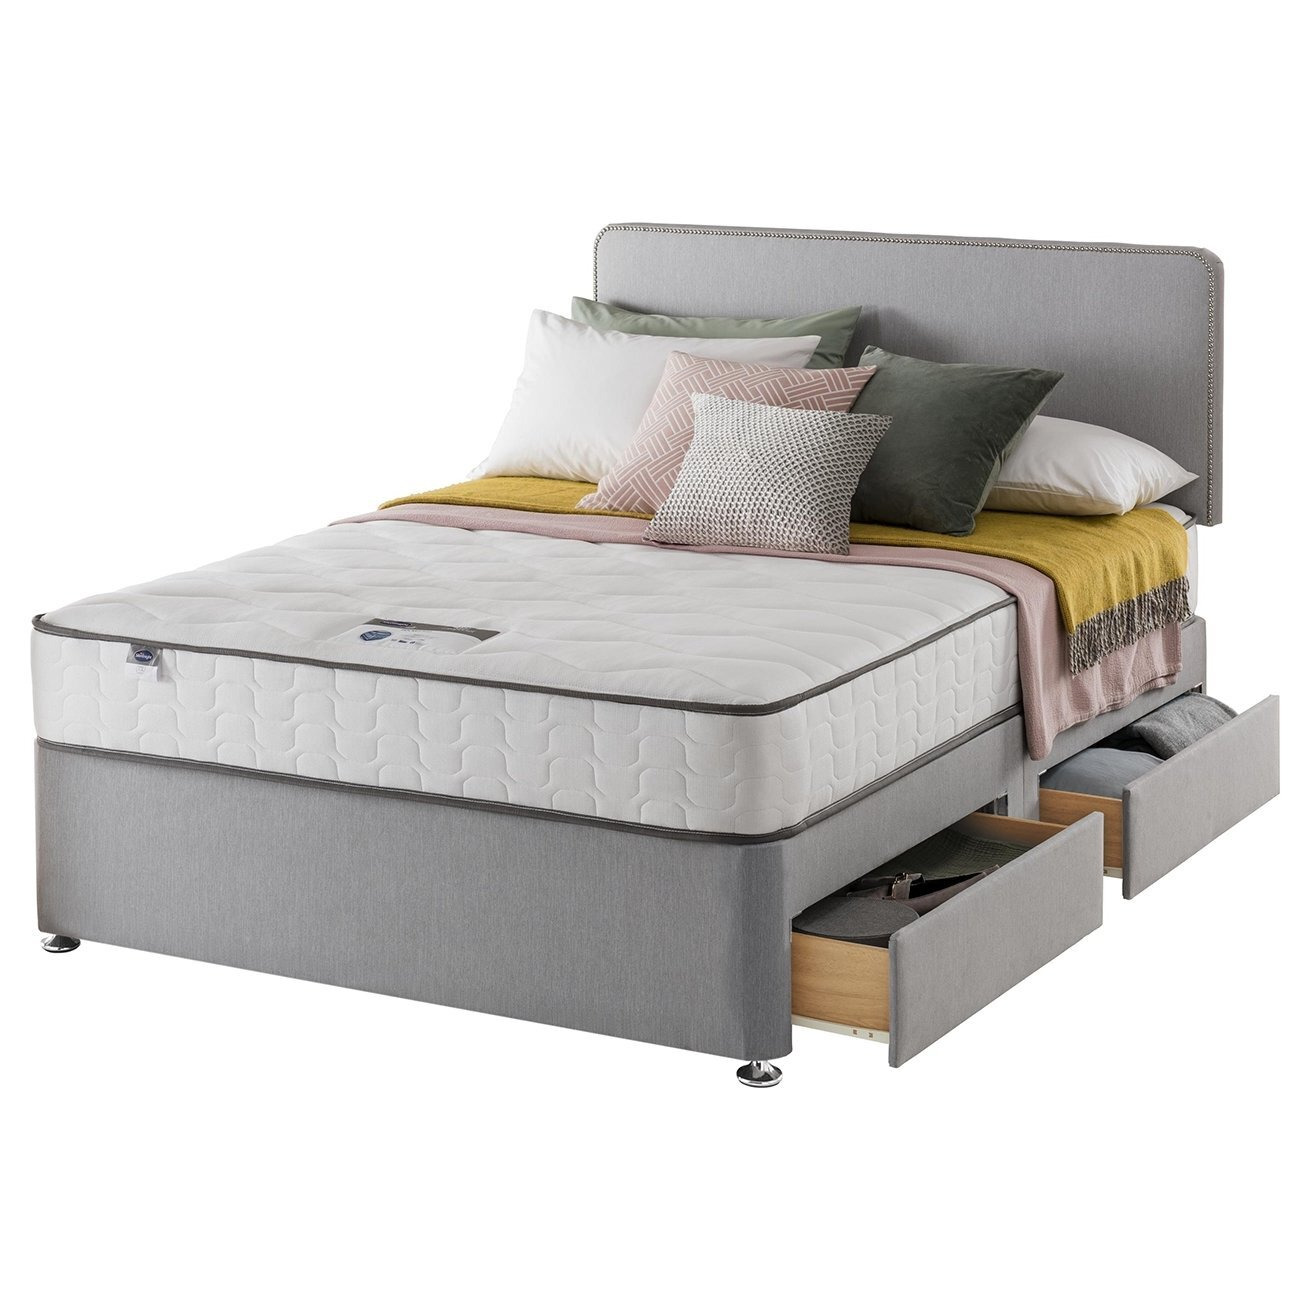 Silentnight Pavia Small Double 4 Drawer Divan Bed - Grey - image 1